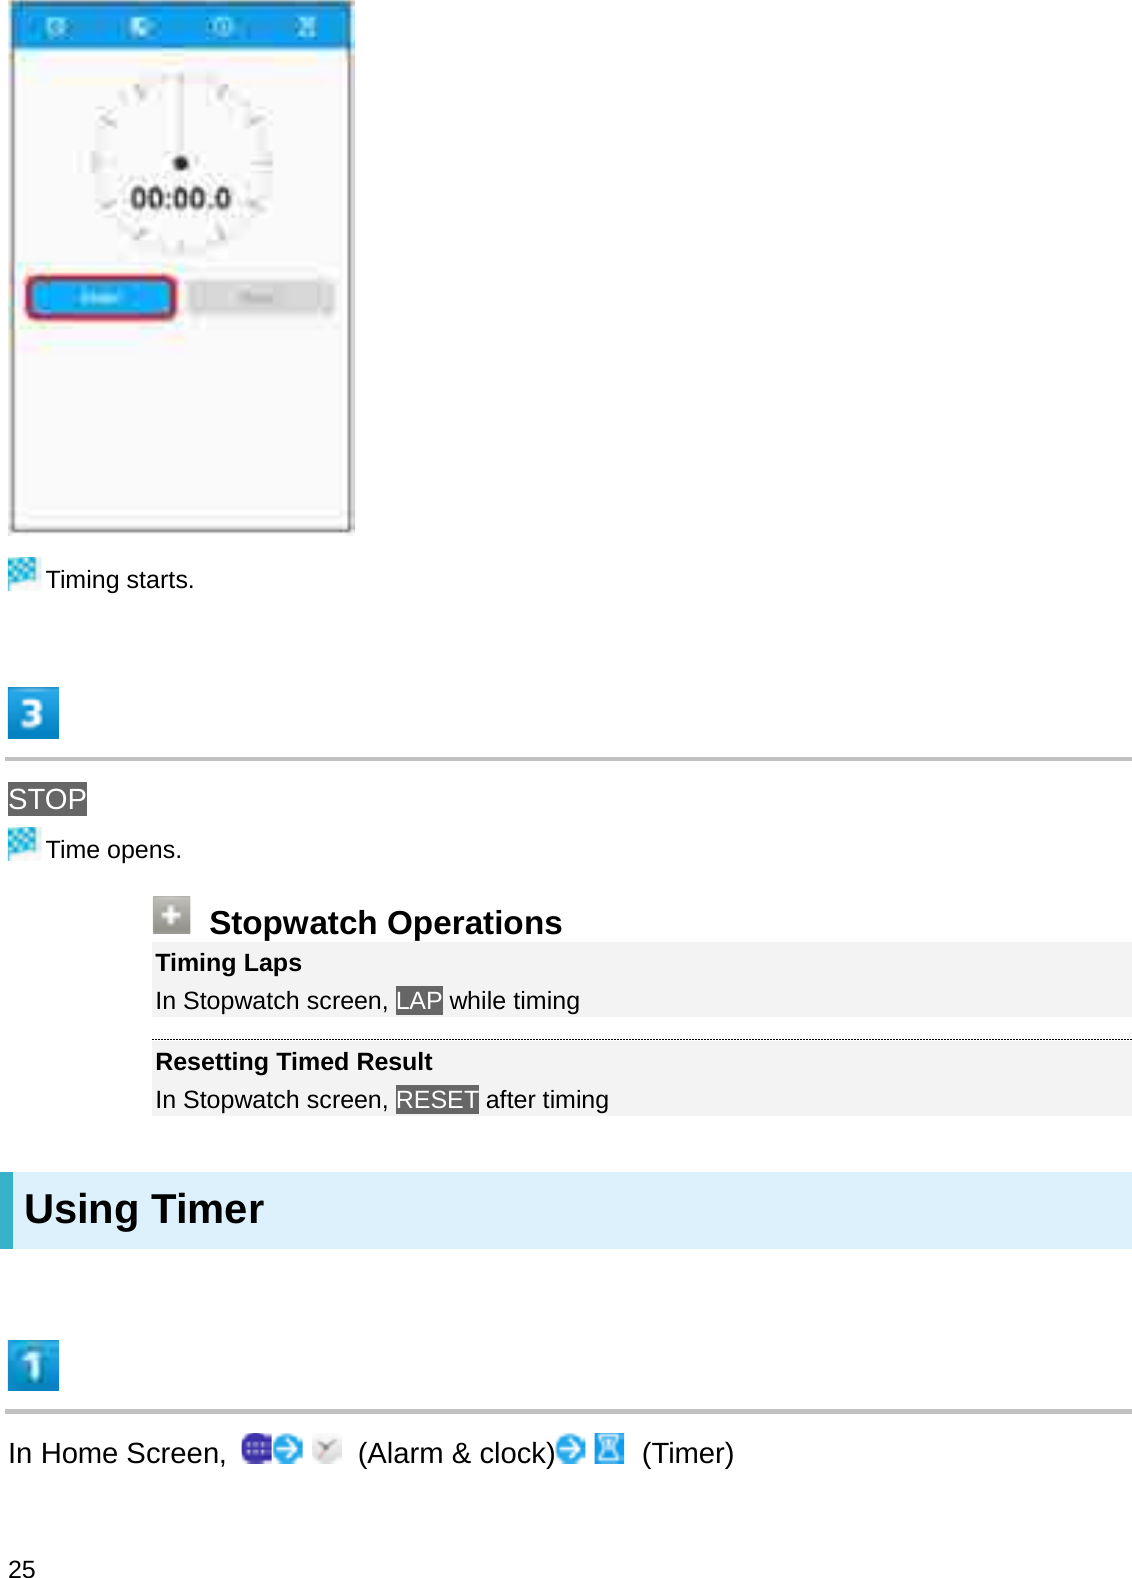 Timing starts.STOPTime opens.Stopwatch OperationsTiming LapsIn Stopwatch screen, LAP while timingResetting Timed ResultIn Stopwatch screen, RESET after timingUsing TimerIn Home Screen,  (Alarm &amp; clock) (Timer)25